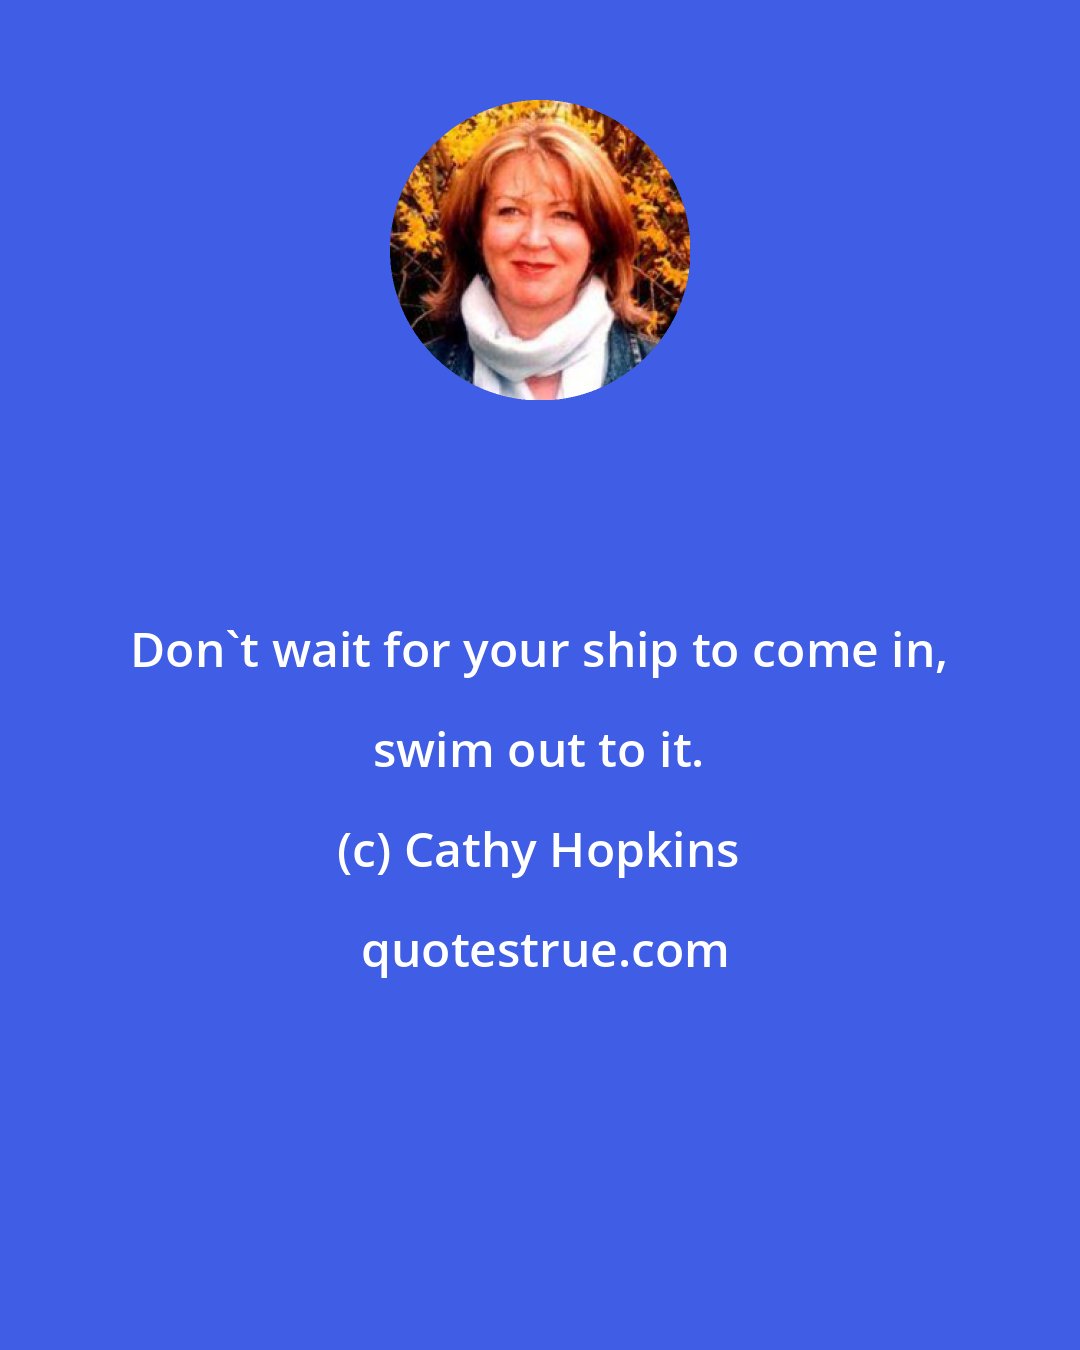 Cathy Hopkins: Don't wait for your ship to come in, swim out to it.